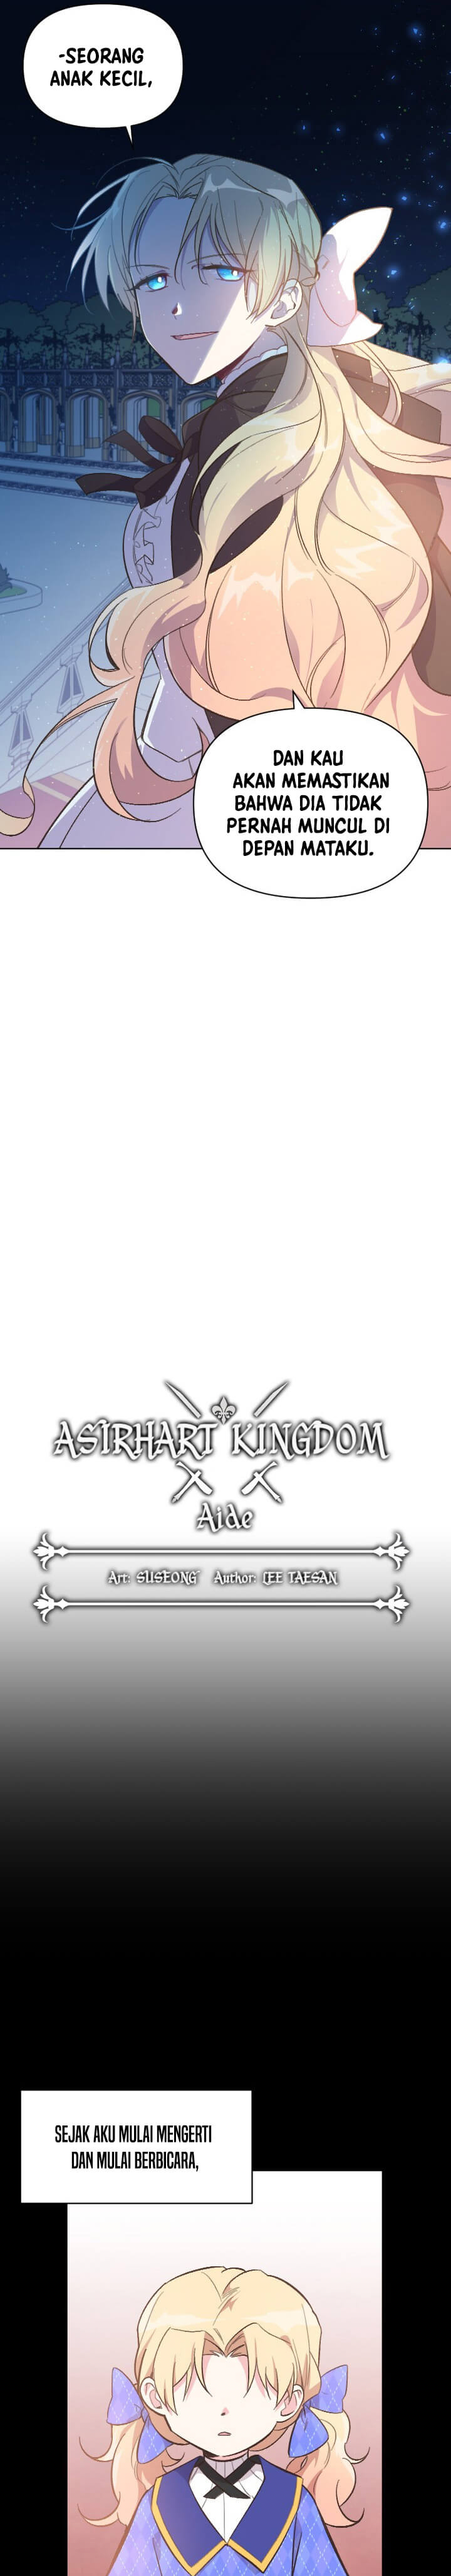 Asirhart Kingdom Aide Chapter 22